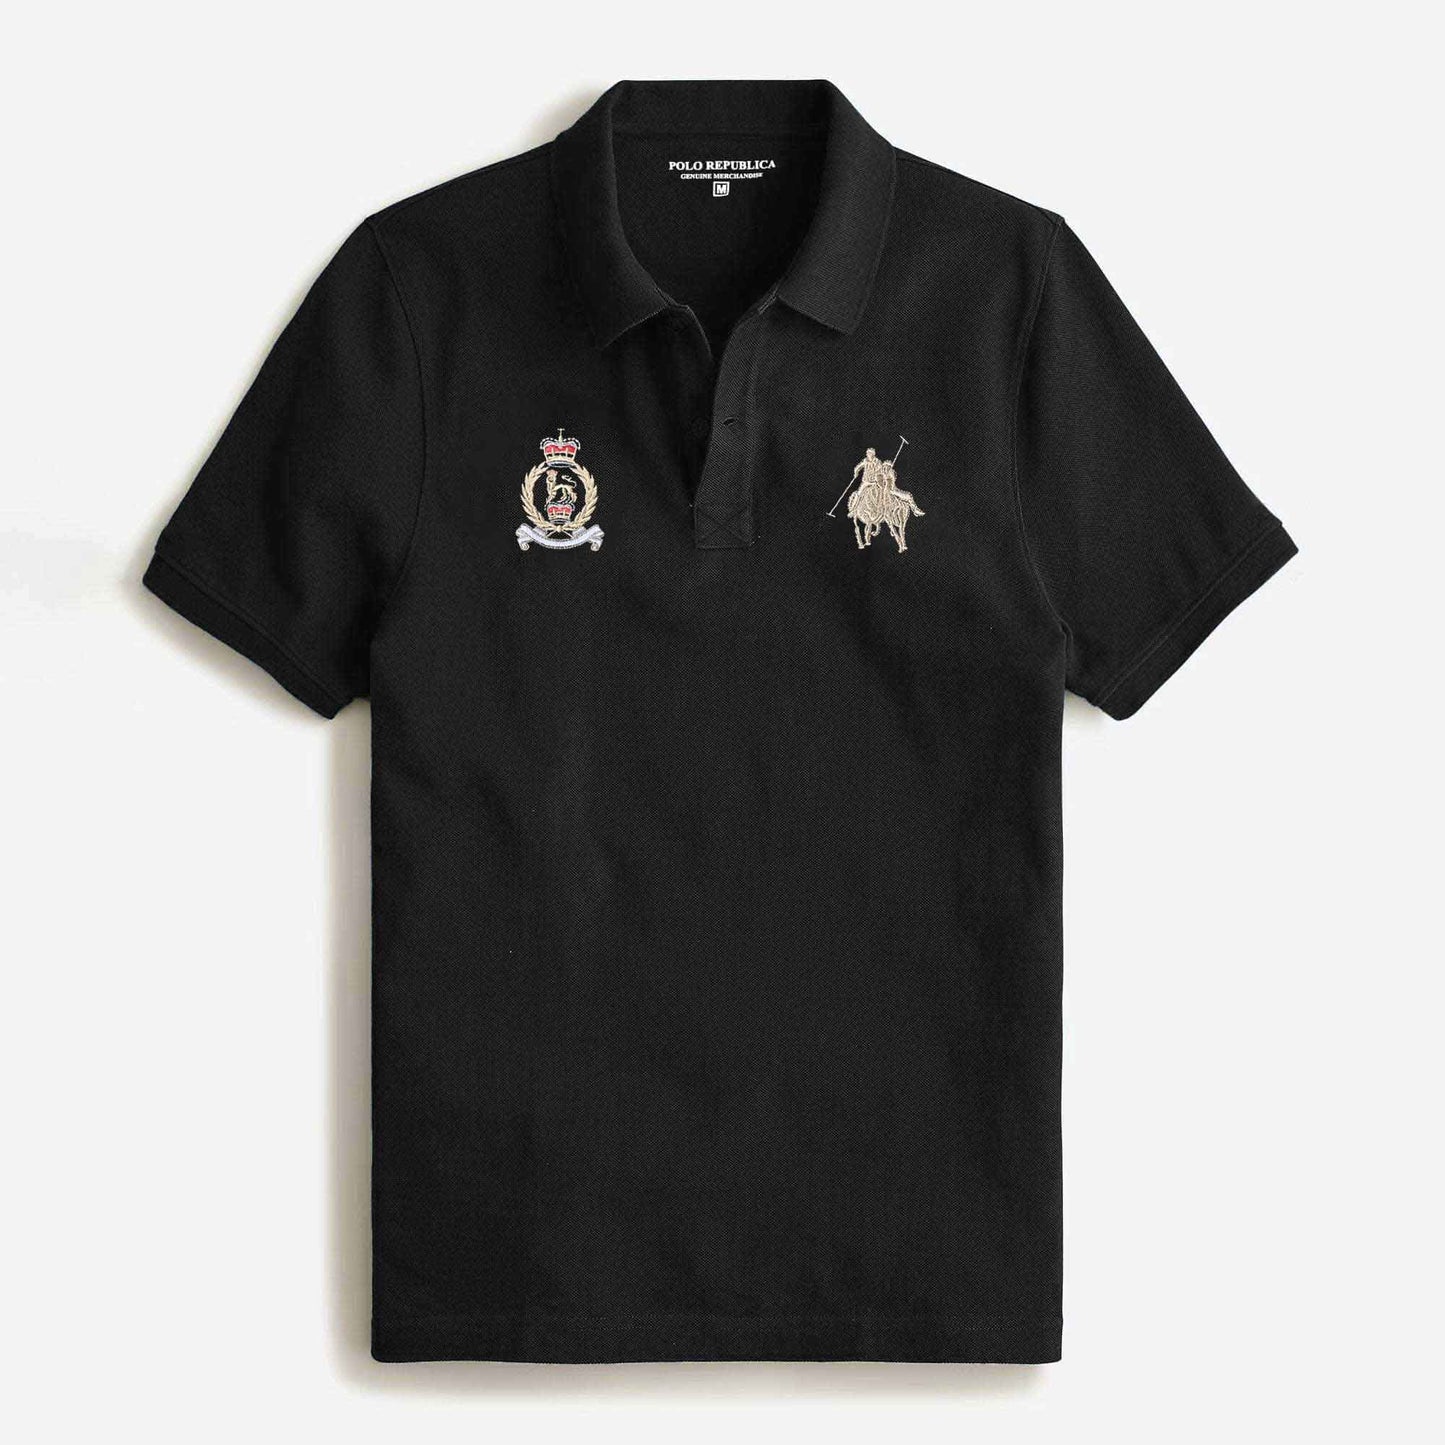 Polo Republica Men's Twin Pony & Crest Embroidered Short Sleeve Polo Shirt